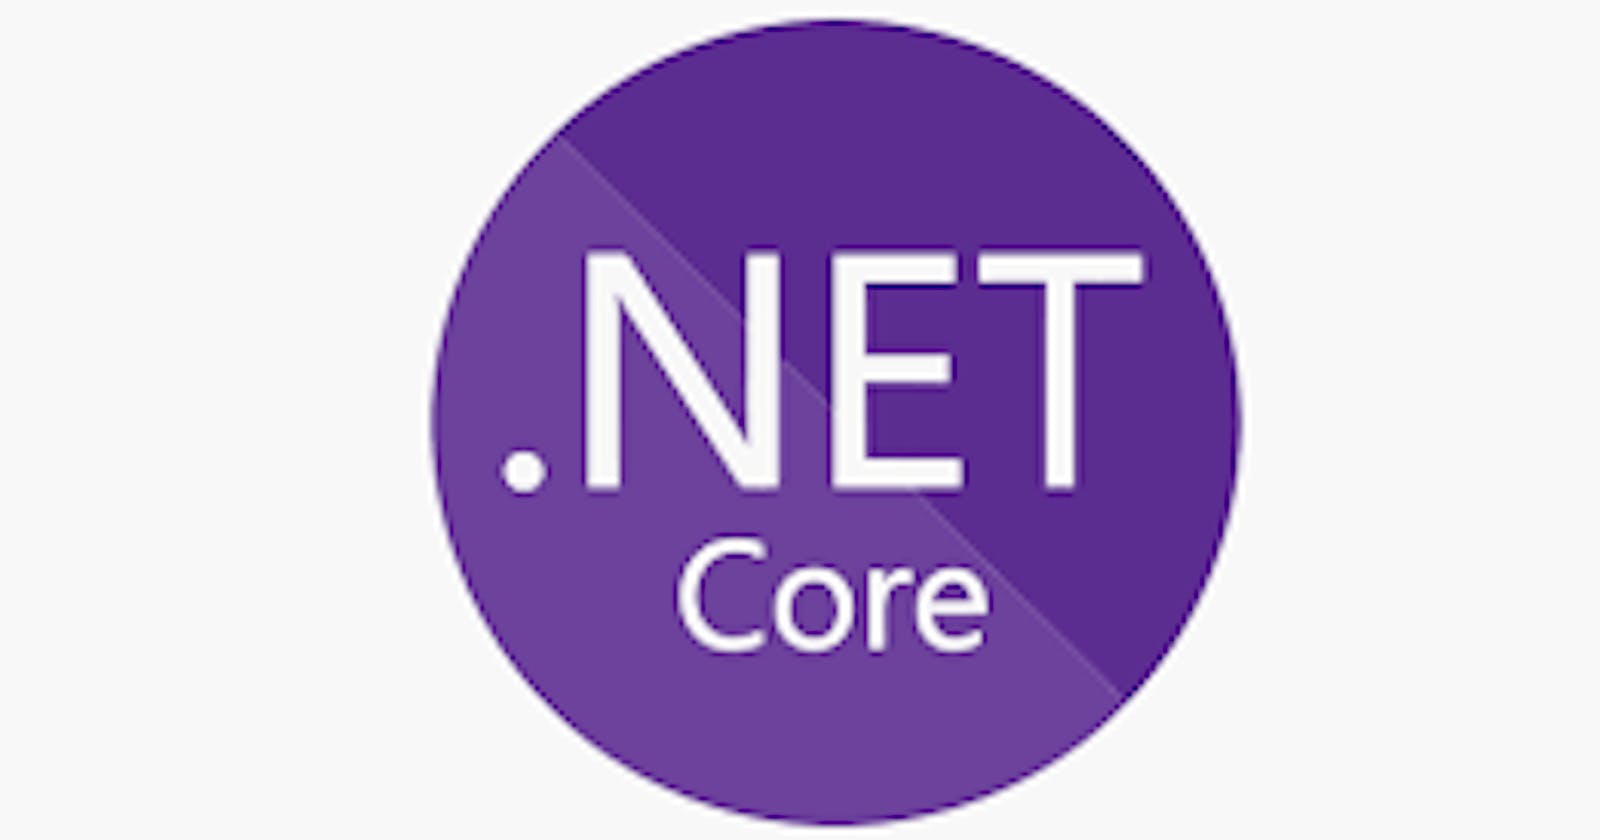 How to Install Dot Net core 3.1 on digital ocean and create c# console app